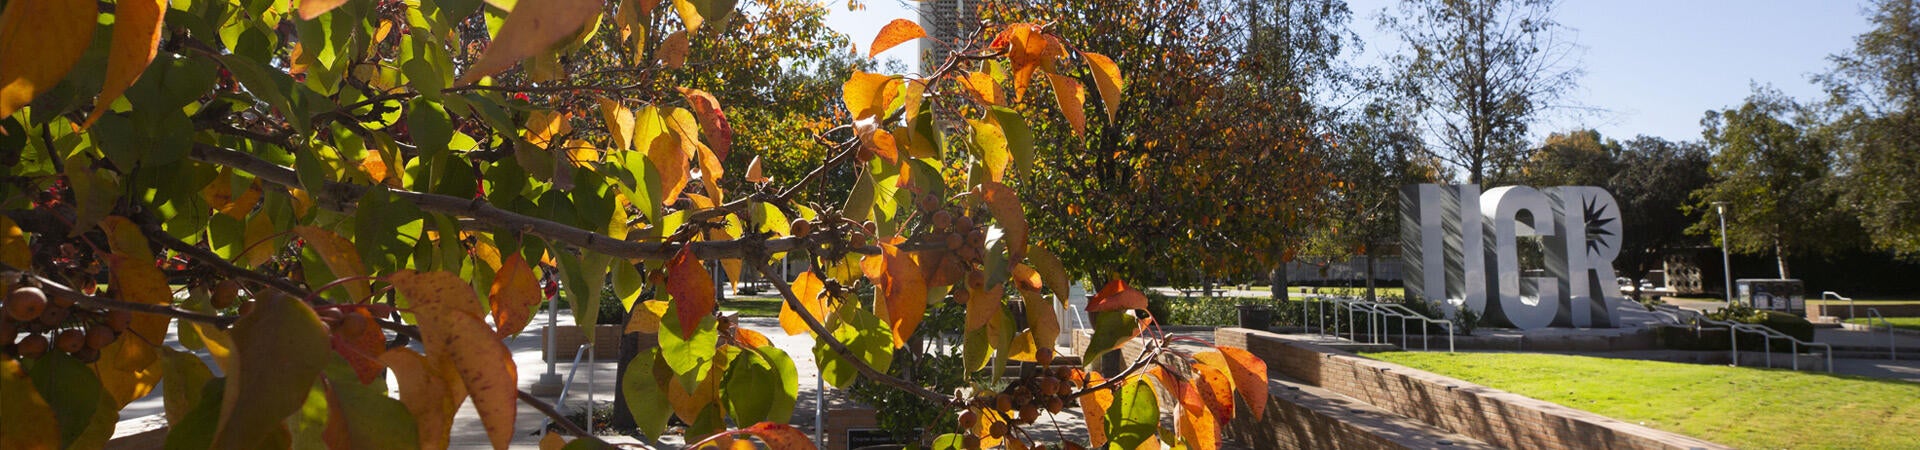 A view of the UCR sculpture in the center of the UC Riverside campus. A tree with gold, red, and orange leaves frame the scene.